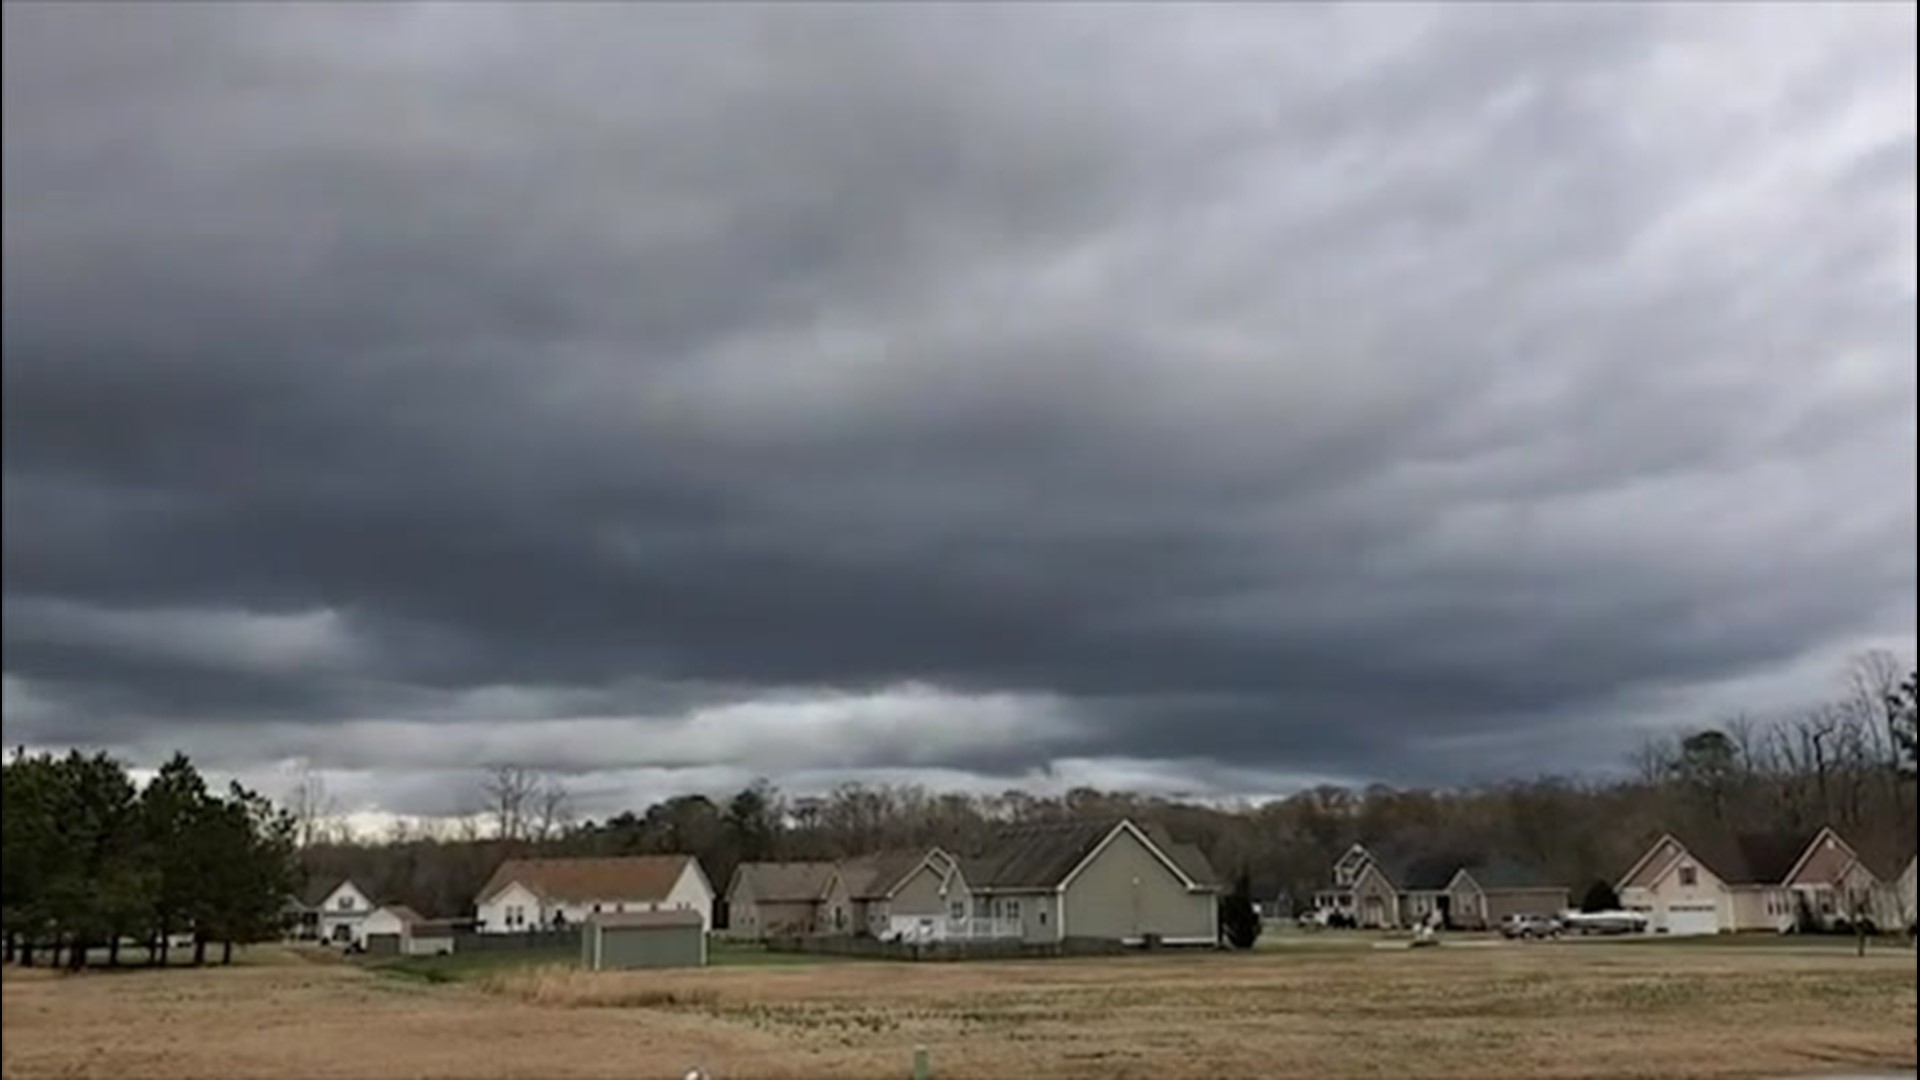 Dark and stormy clouds cruised over the town of Currituck on March 1 as a storm front passed through the area.